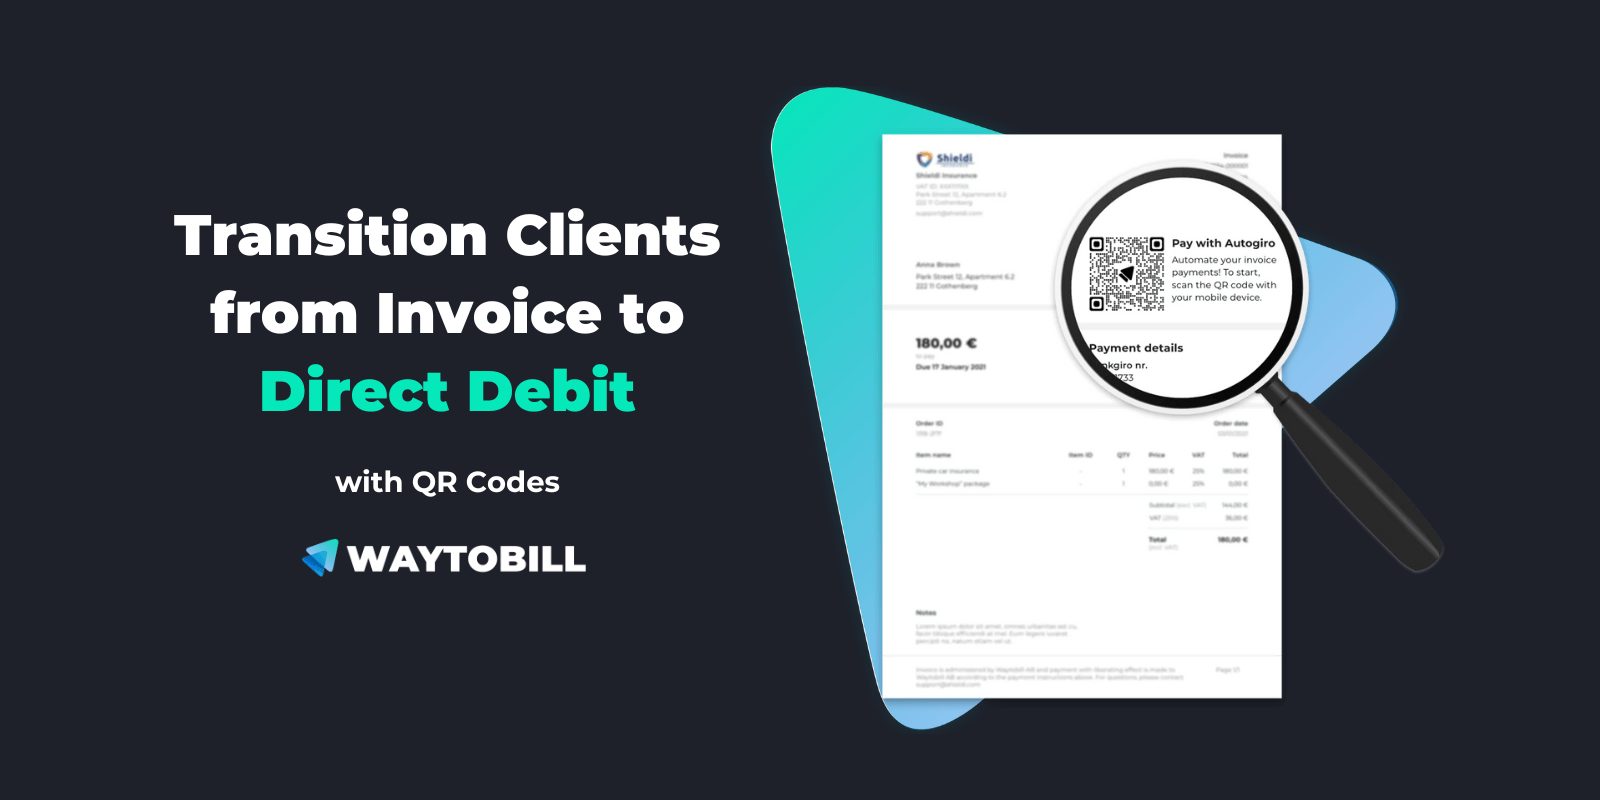 How to Use QR Codes for Invoice to Direct Debit Transitions for Insurance